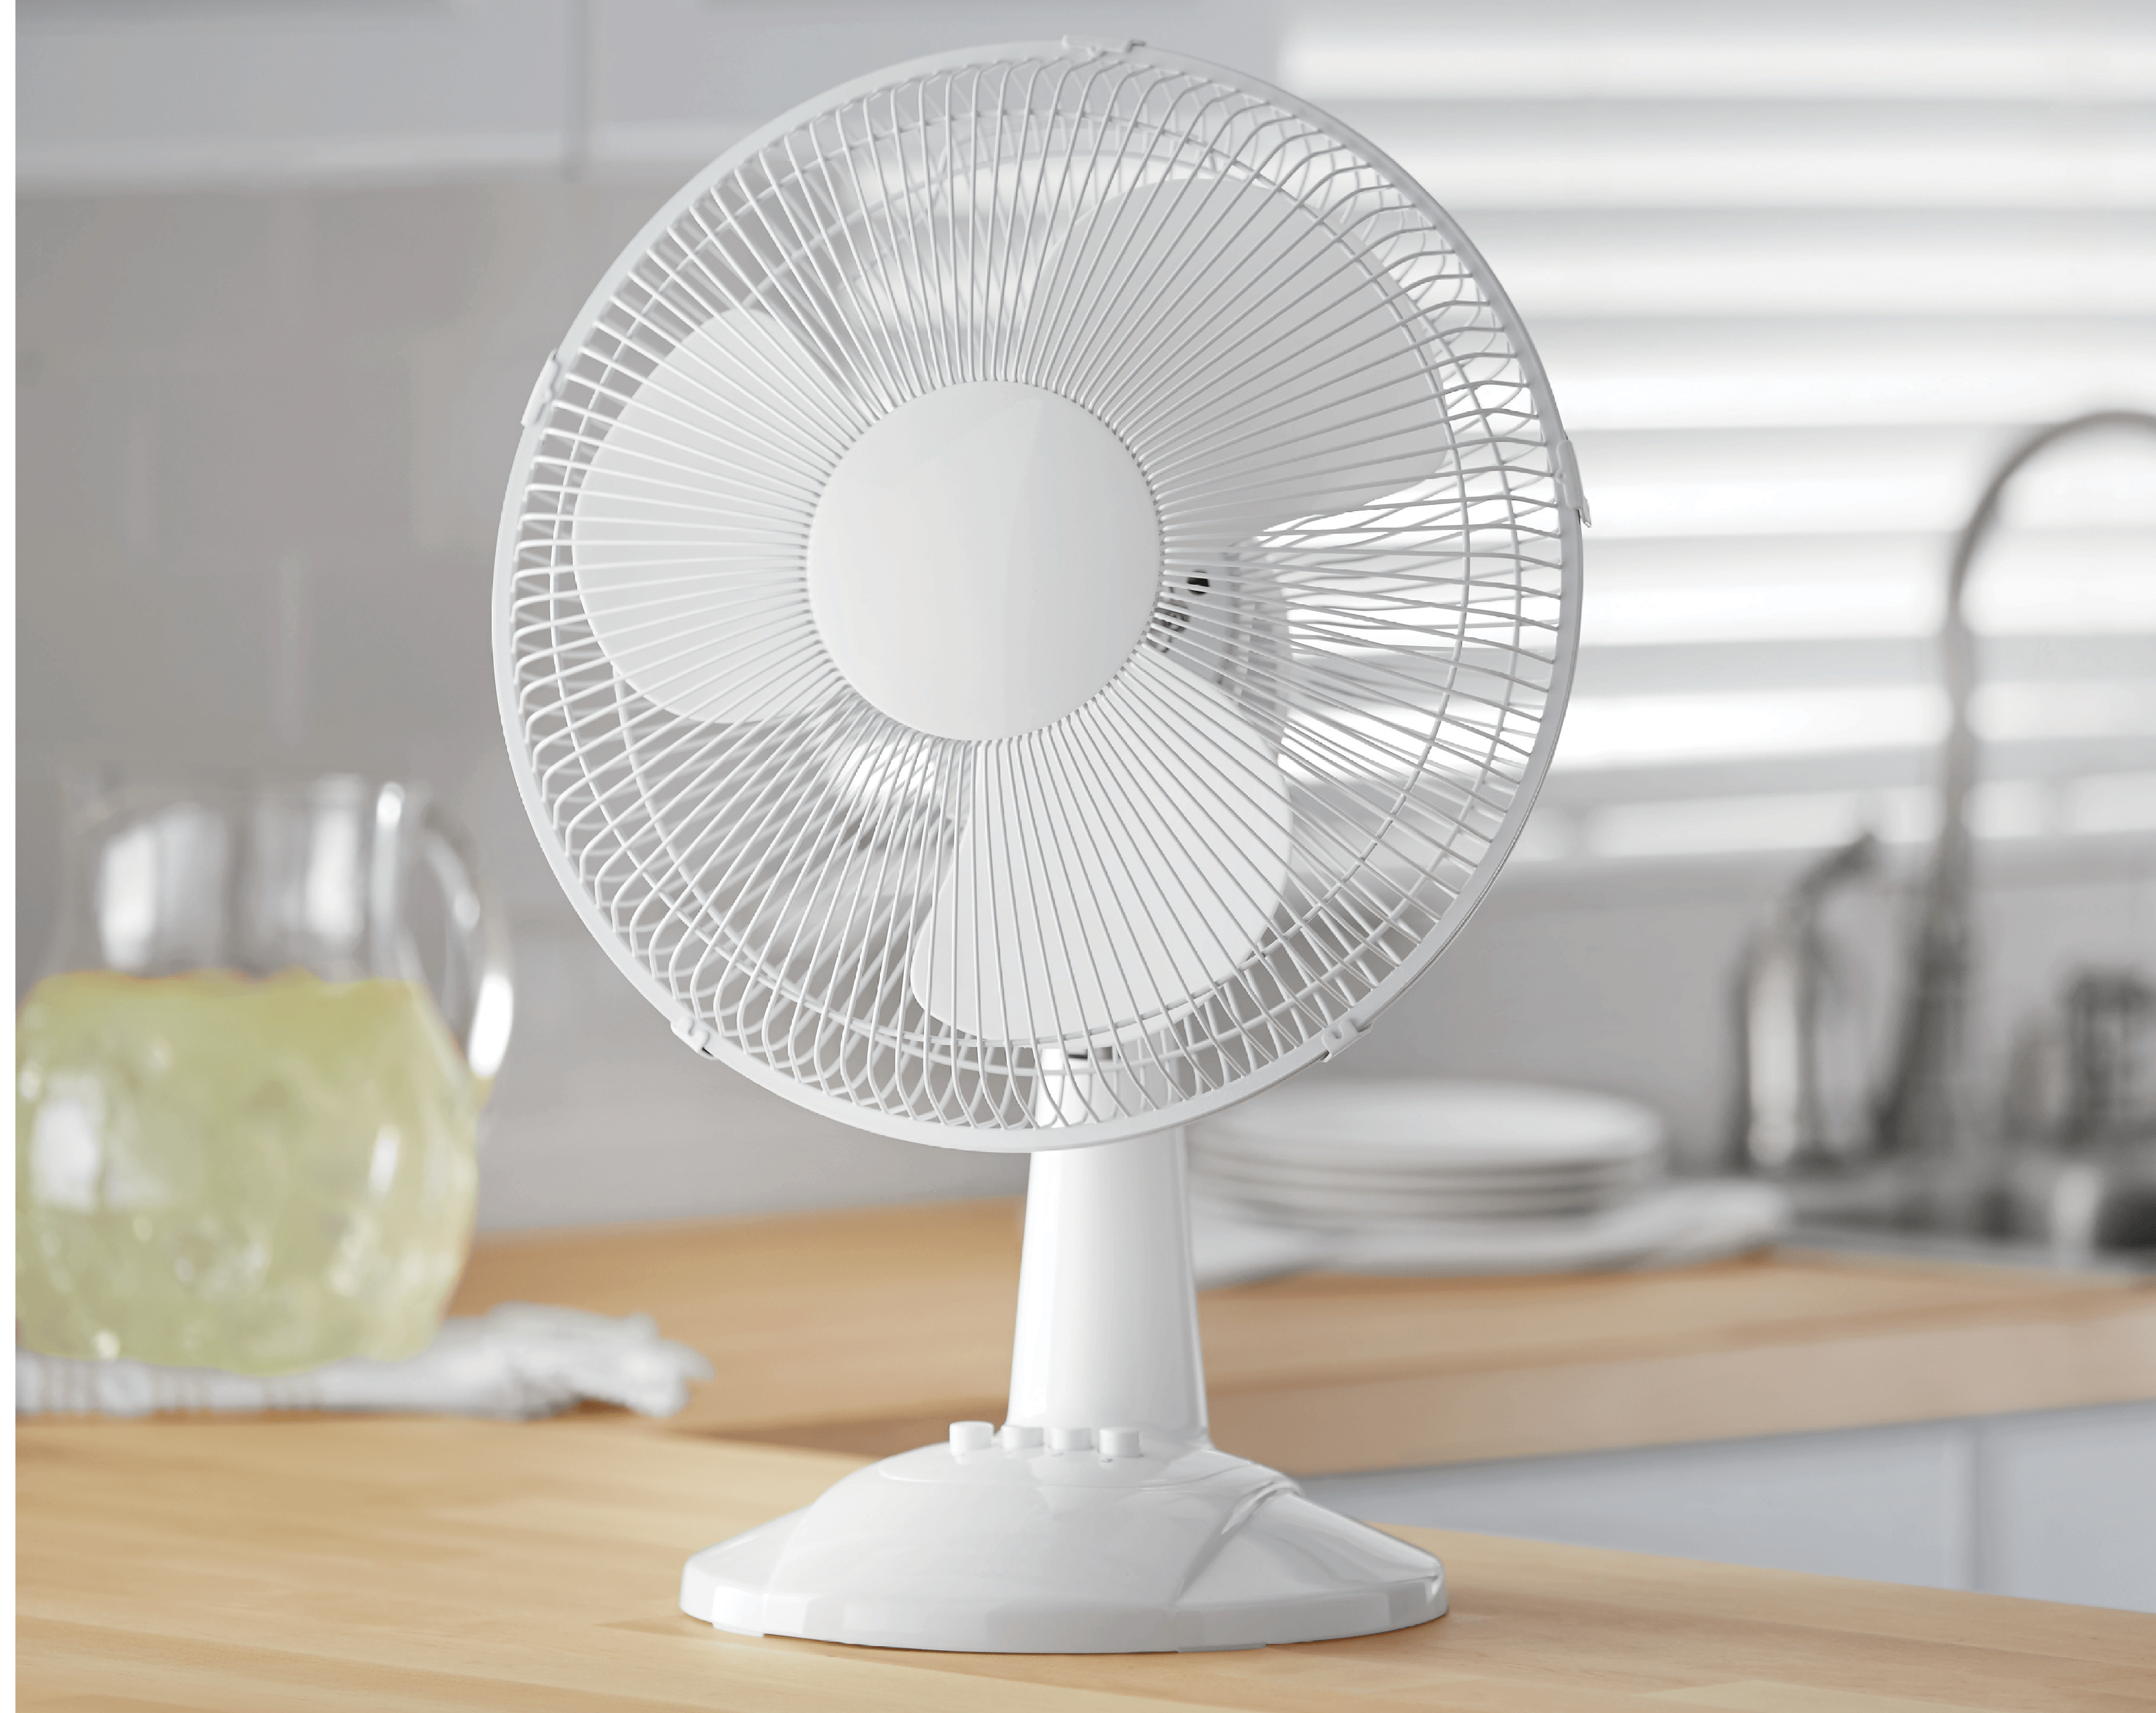 Mainstays 12" 3-Speed Oscillating Table Fan, FT30-8MBW, New, White - image 4 of 8